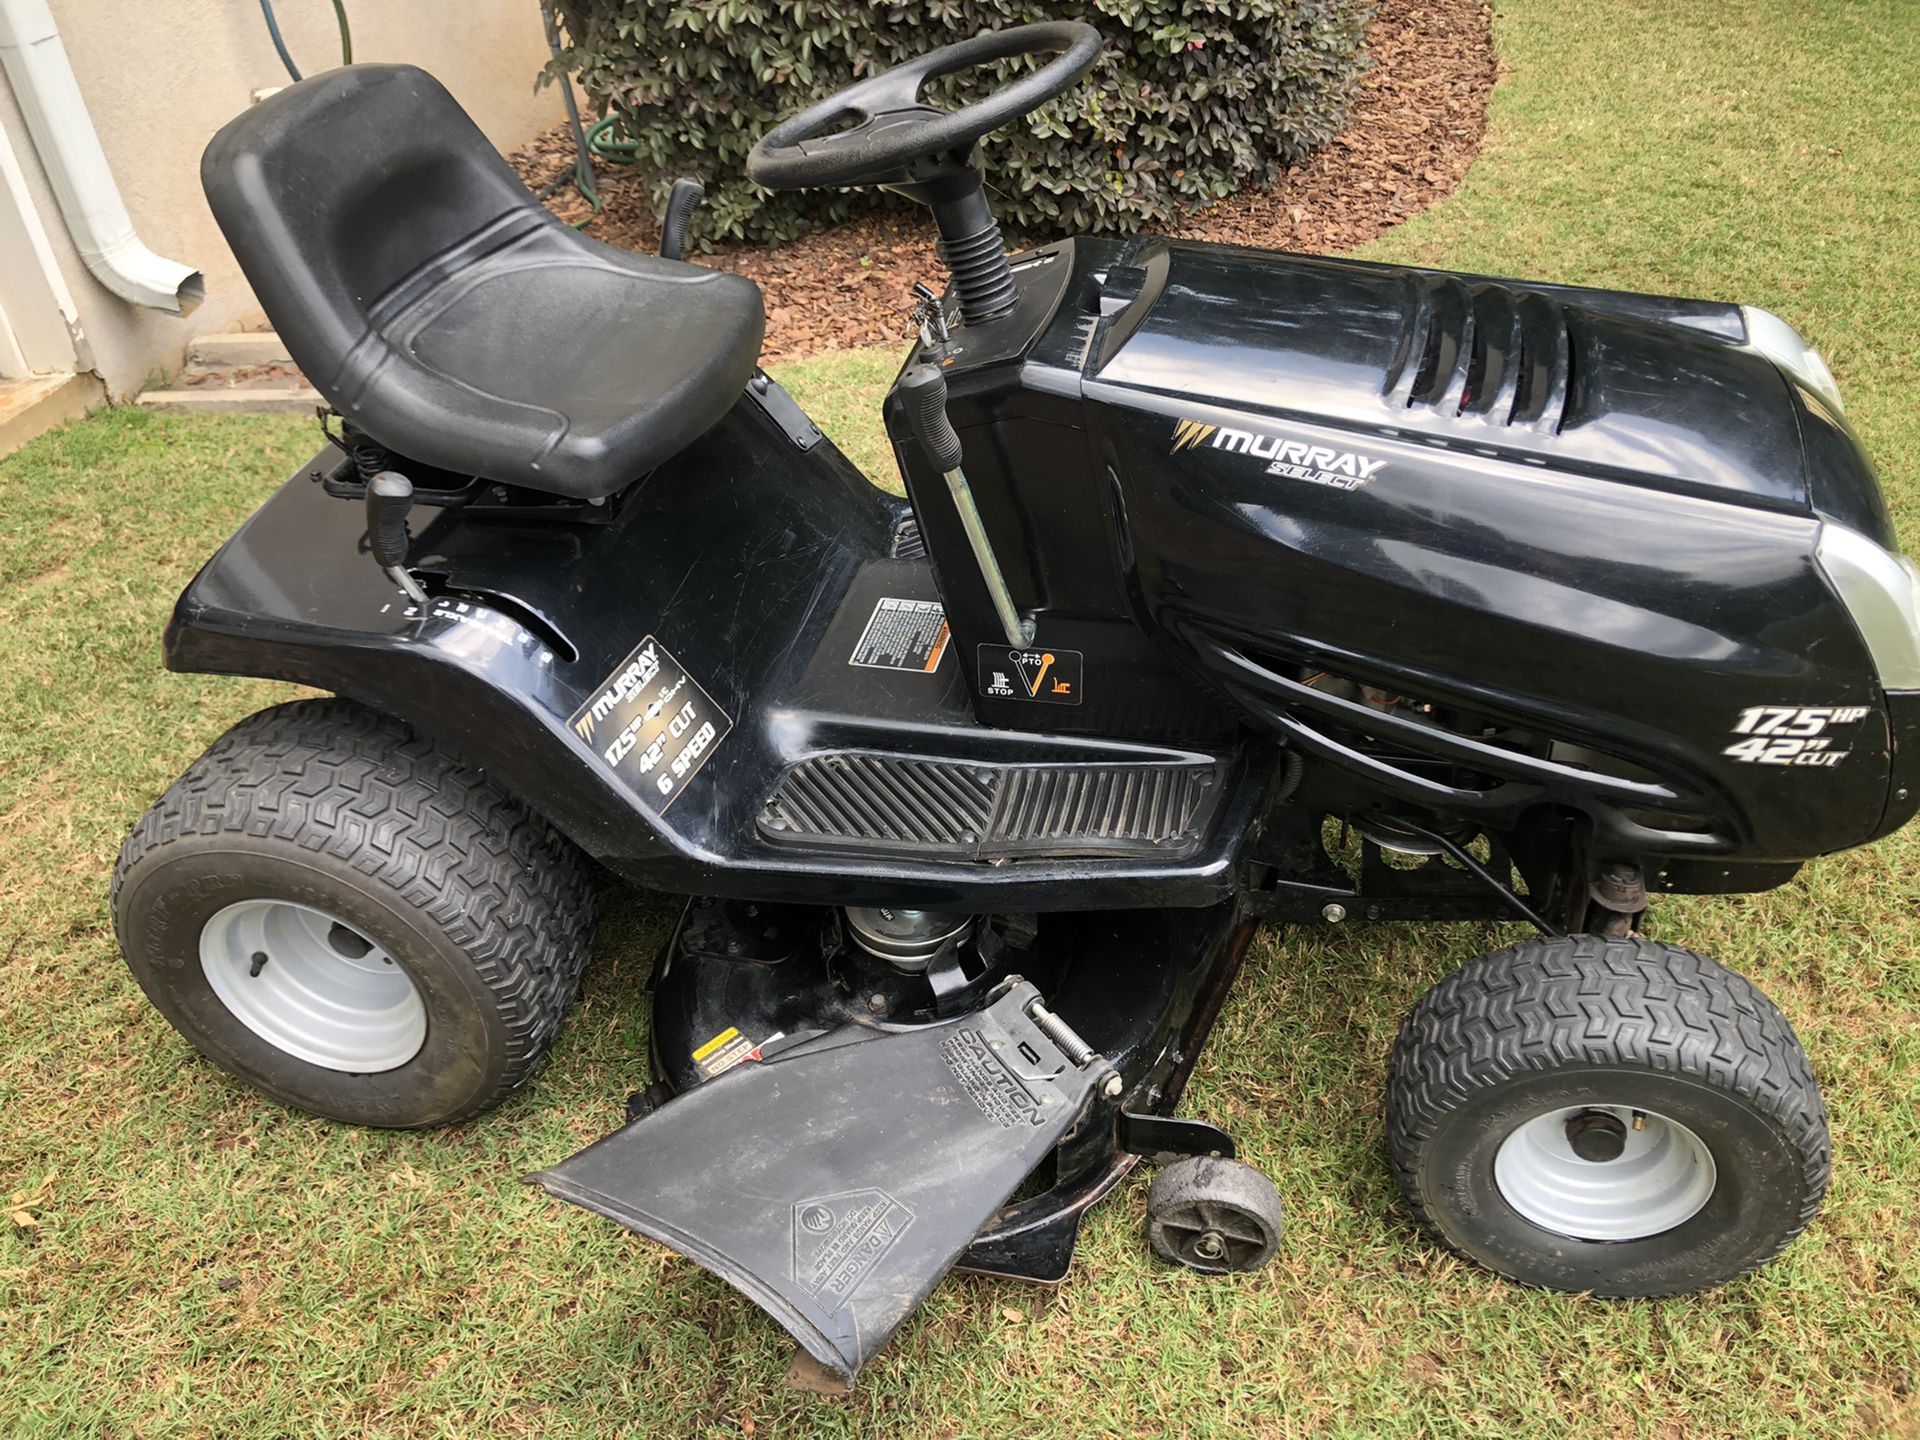 Murray Select 42” riding lawn mower - NEEDS A NEW STARTER